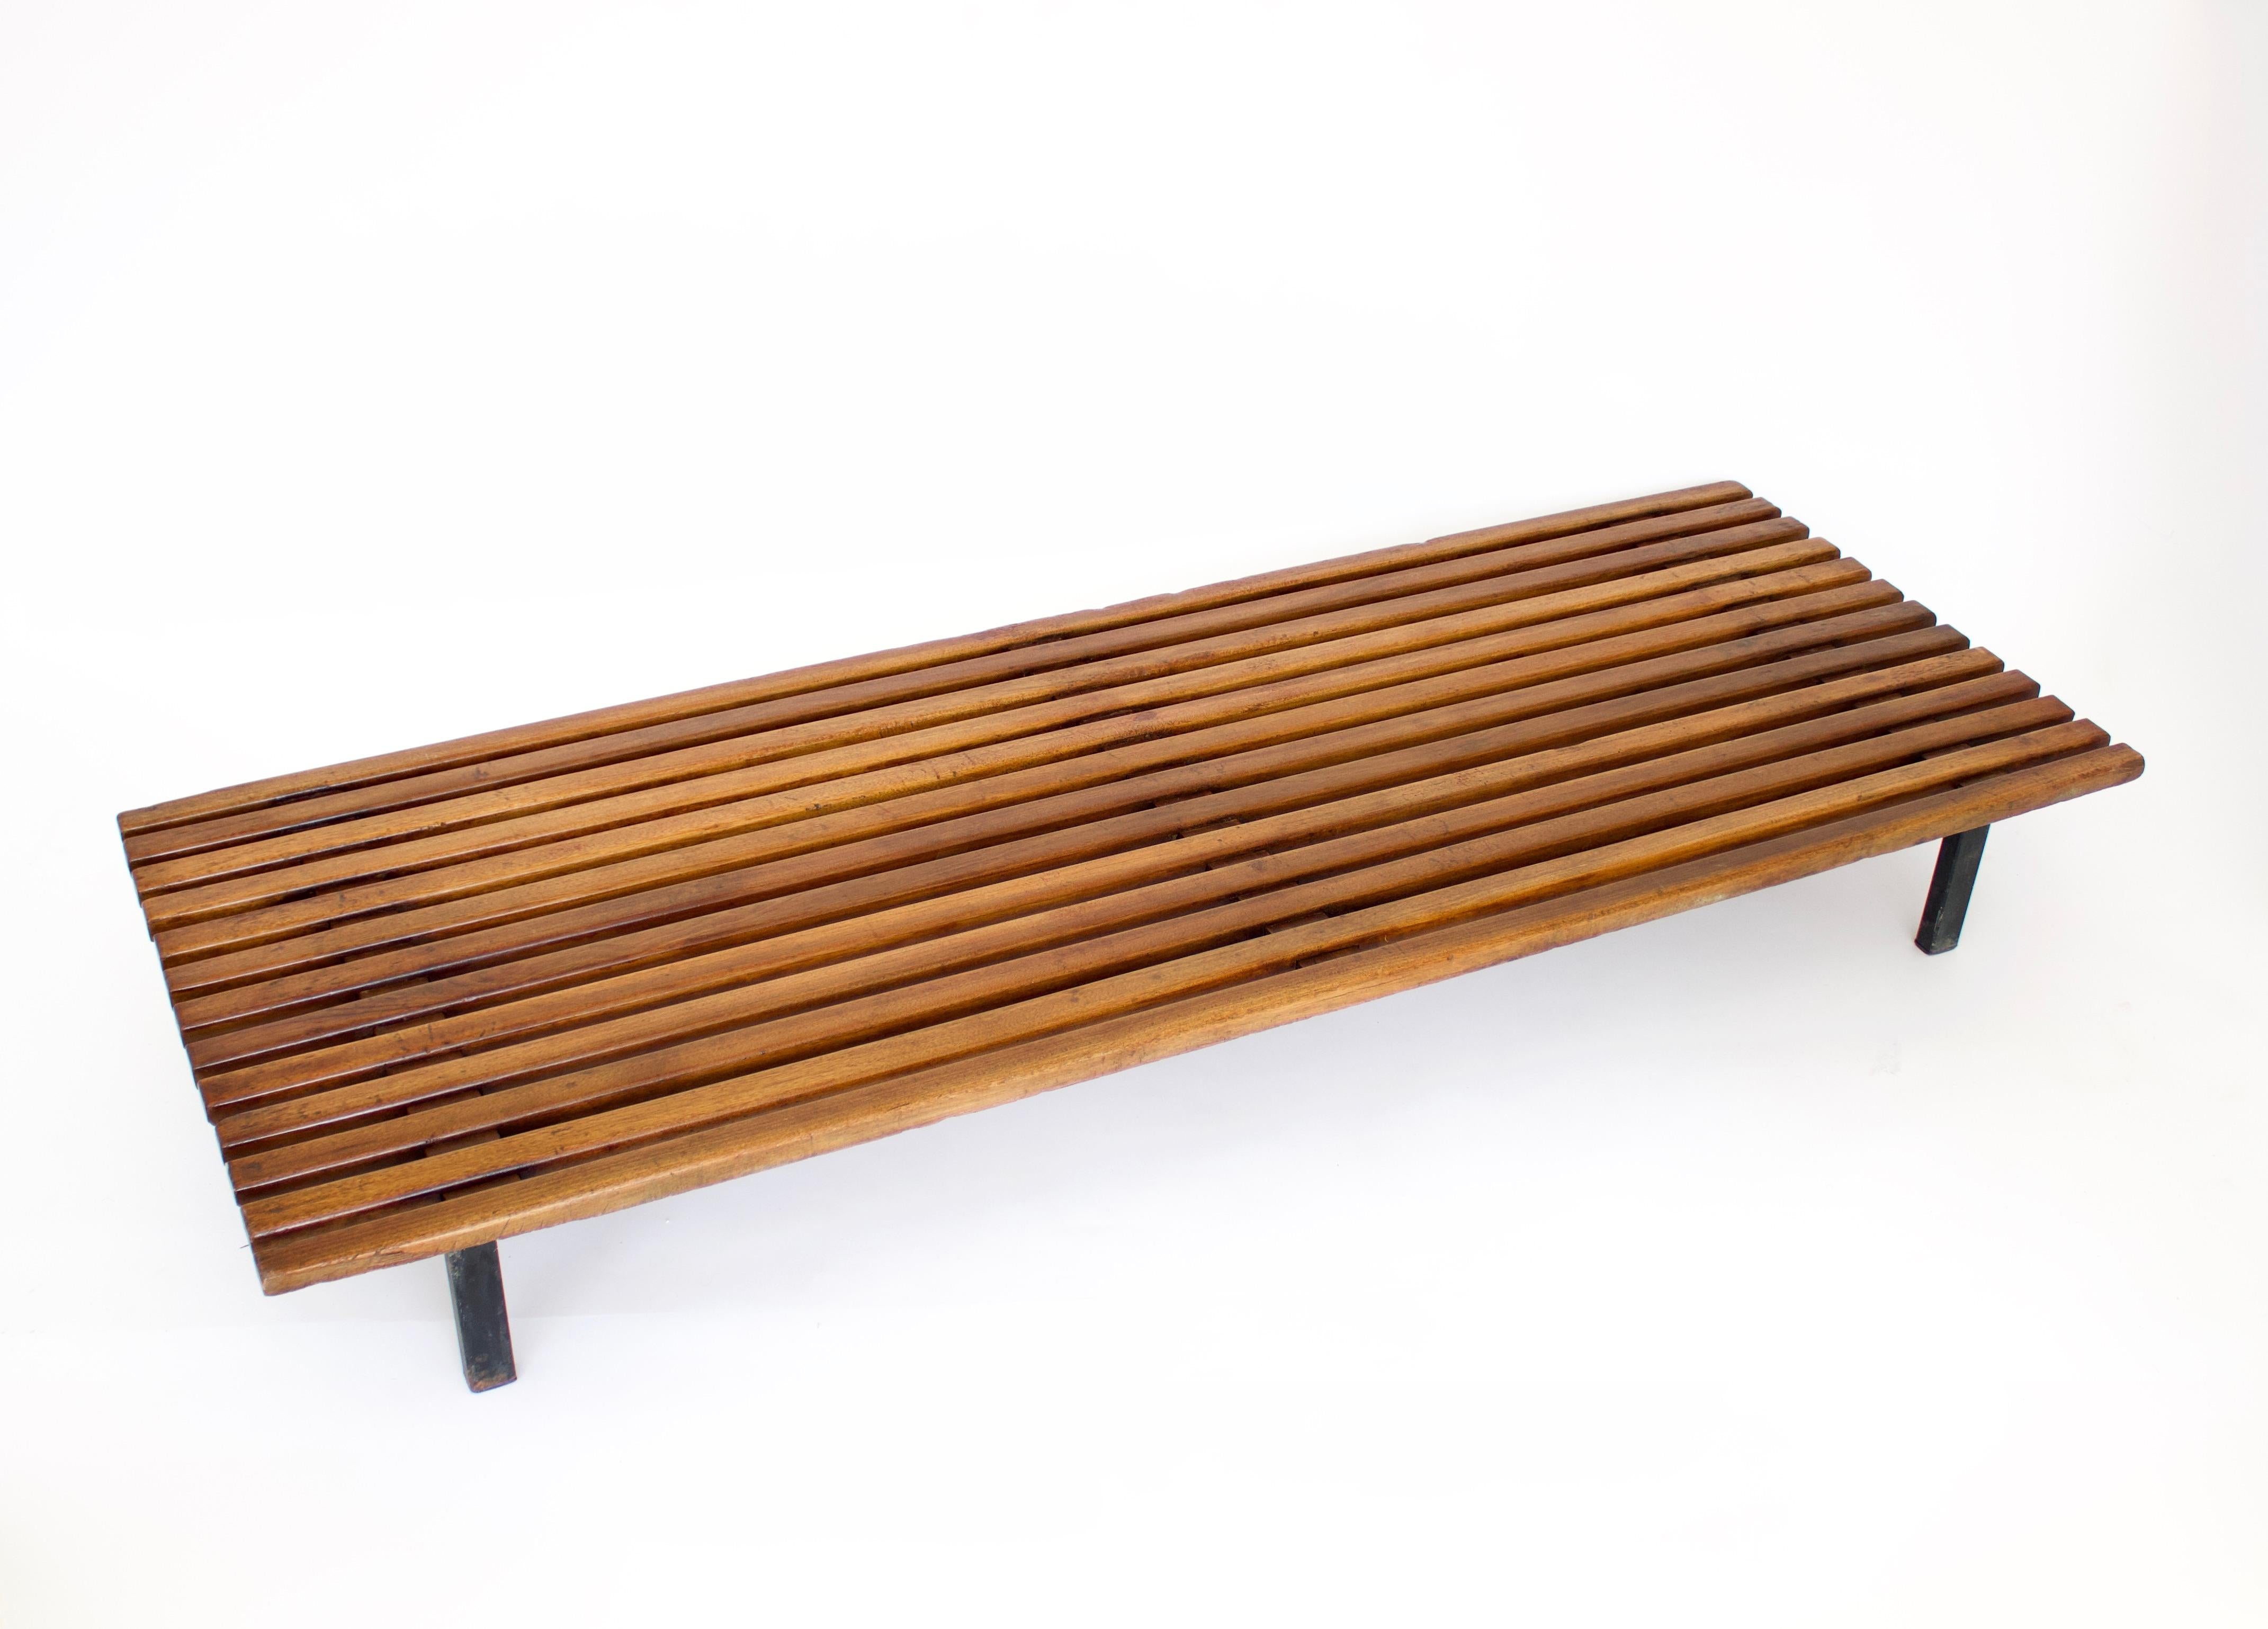 Mid-20th Century Charlotte Perriand Cansado Bench in Mahogany Wood Bench For Sale